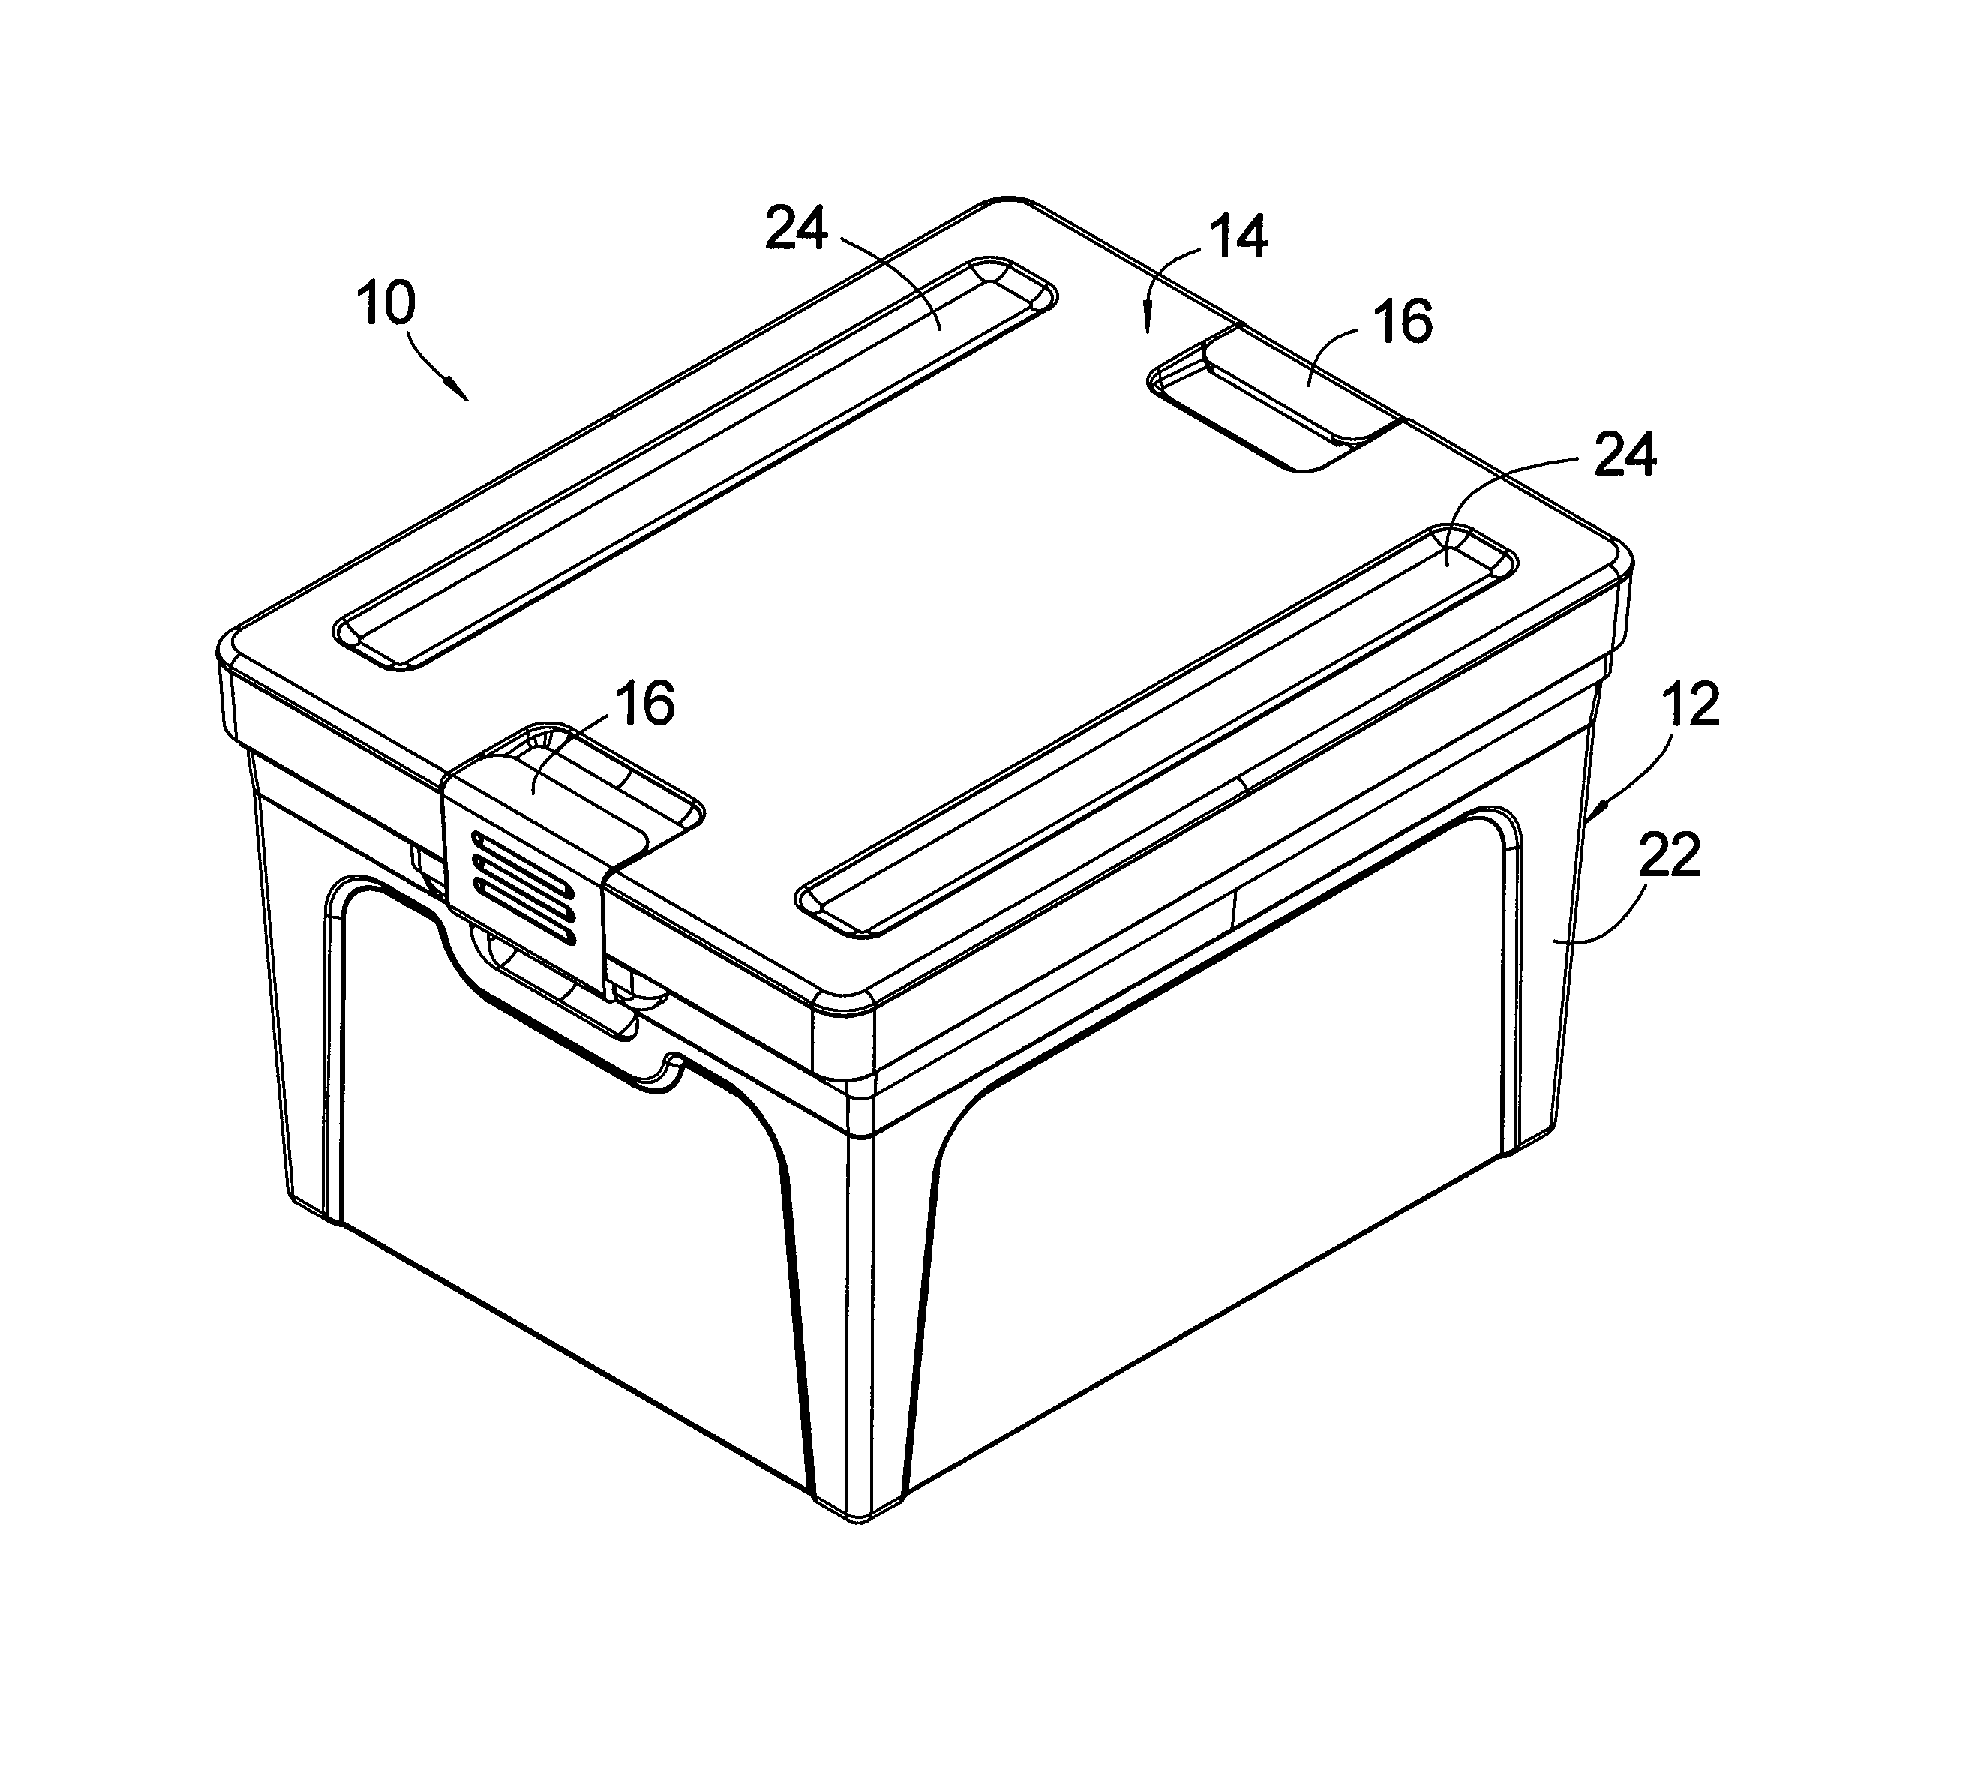 System for stacking archive boxes including a fire-resistant drywall support shell